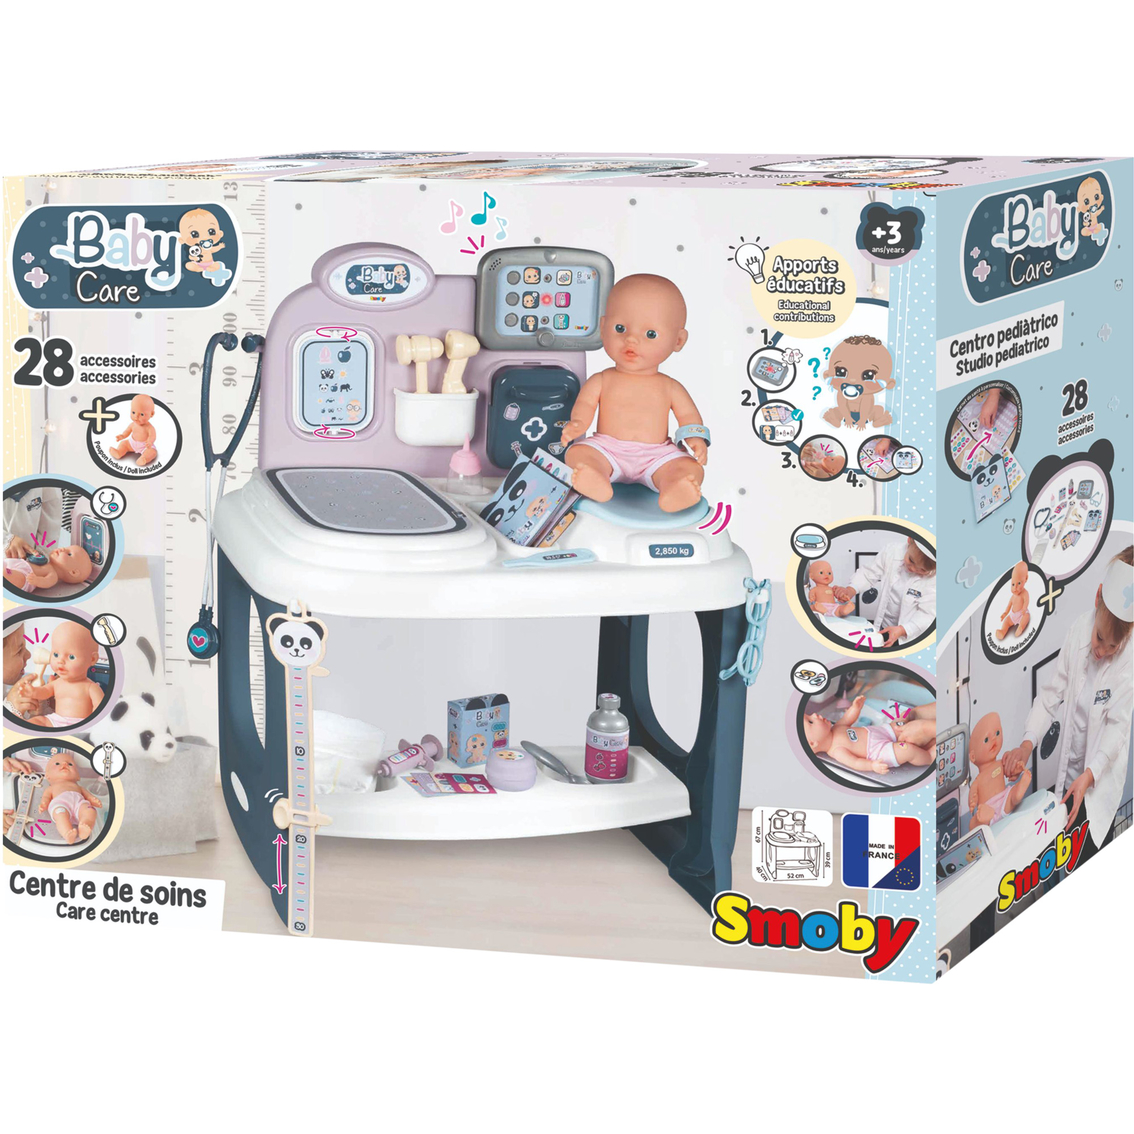 Smoby Toys Baby Care Center Toy - Image 4 of 8